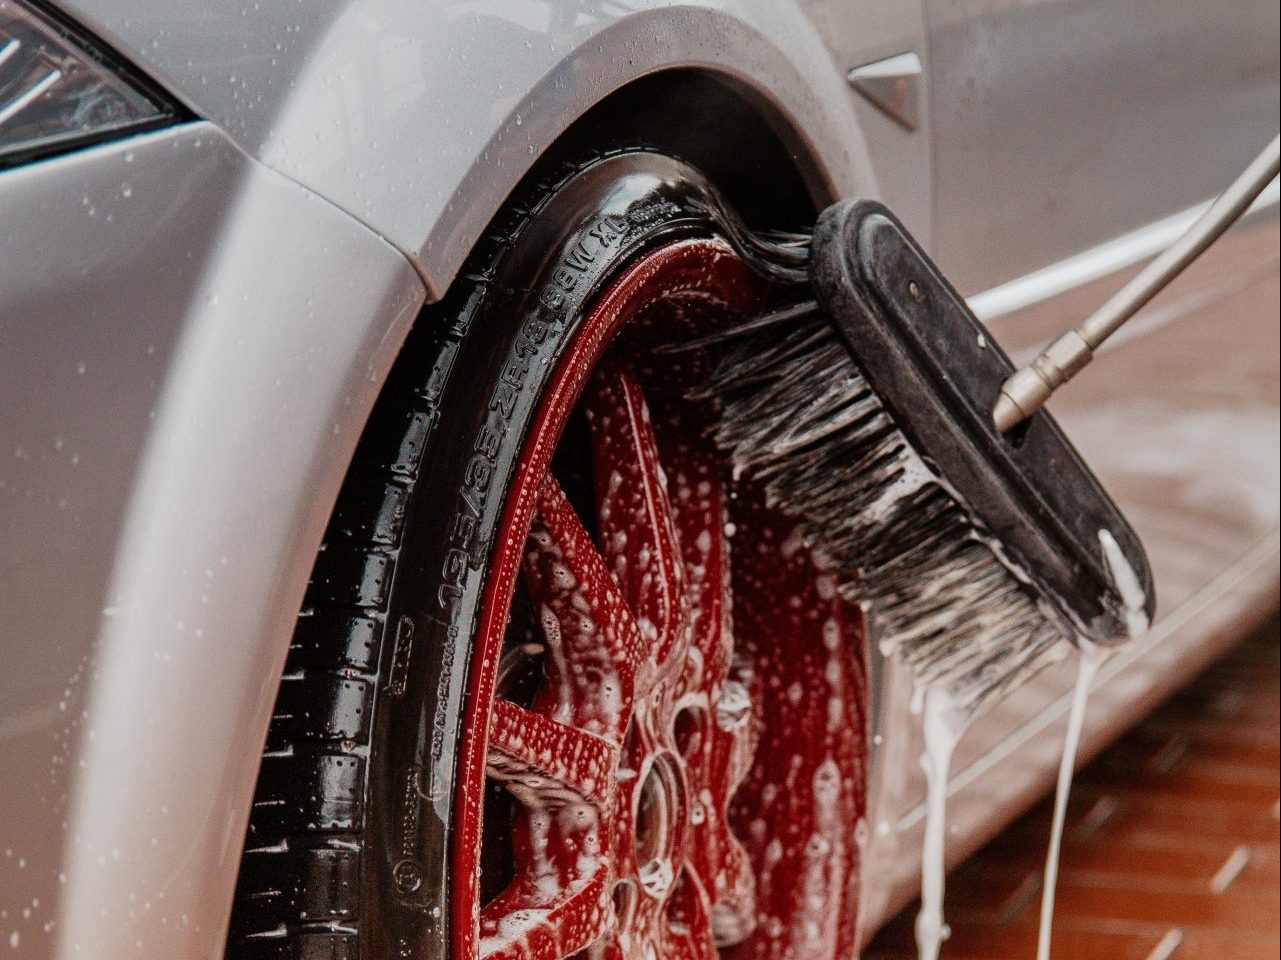 What Can You Wash Your Car With? - Zoom Car Wash